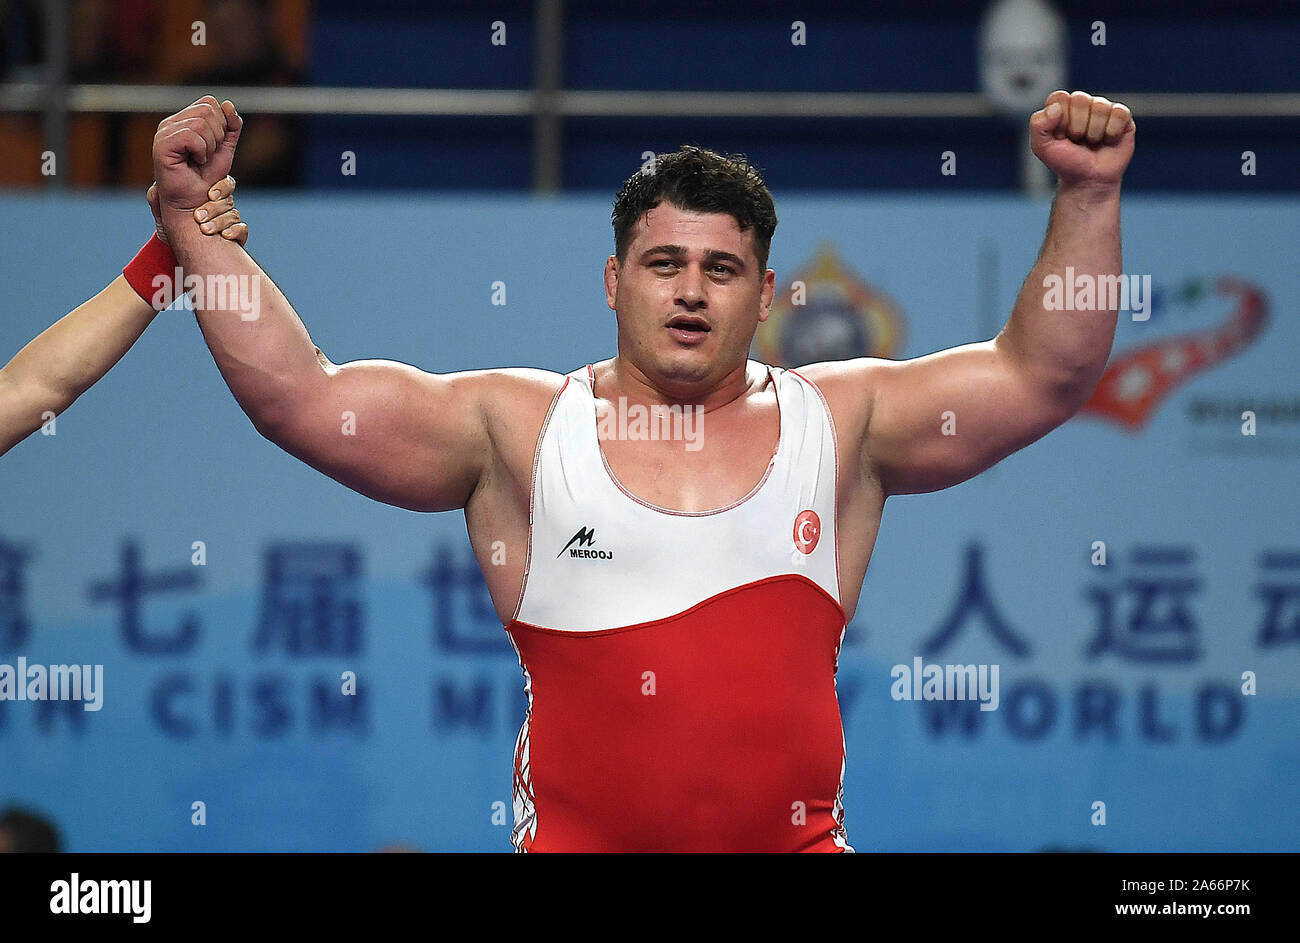 191024) -- WUHAN, Oct. 24, 2019 (Xinhua) -- Riza Kayaalp of Turkey  celebrates after the men's 130kg Greco-Roman wrestling final match at the  7th International Military Sports Council (CISM) Military World Games